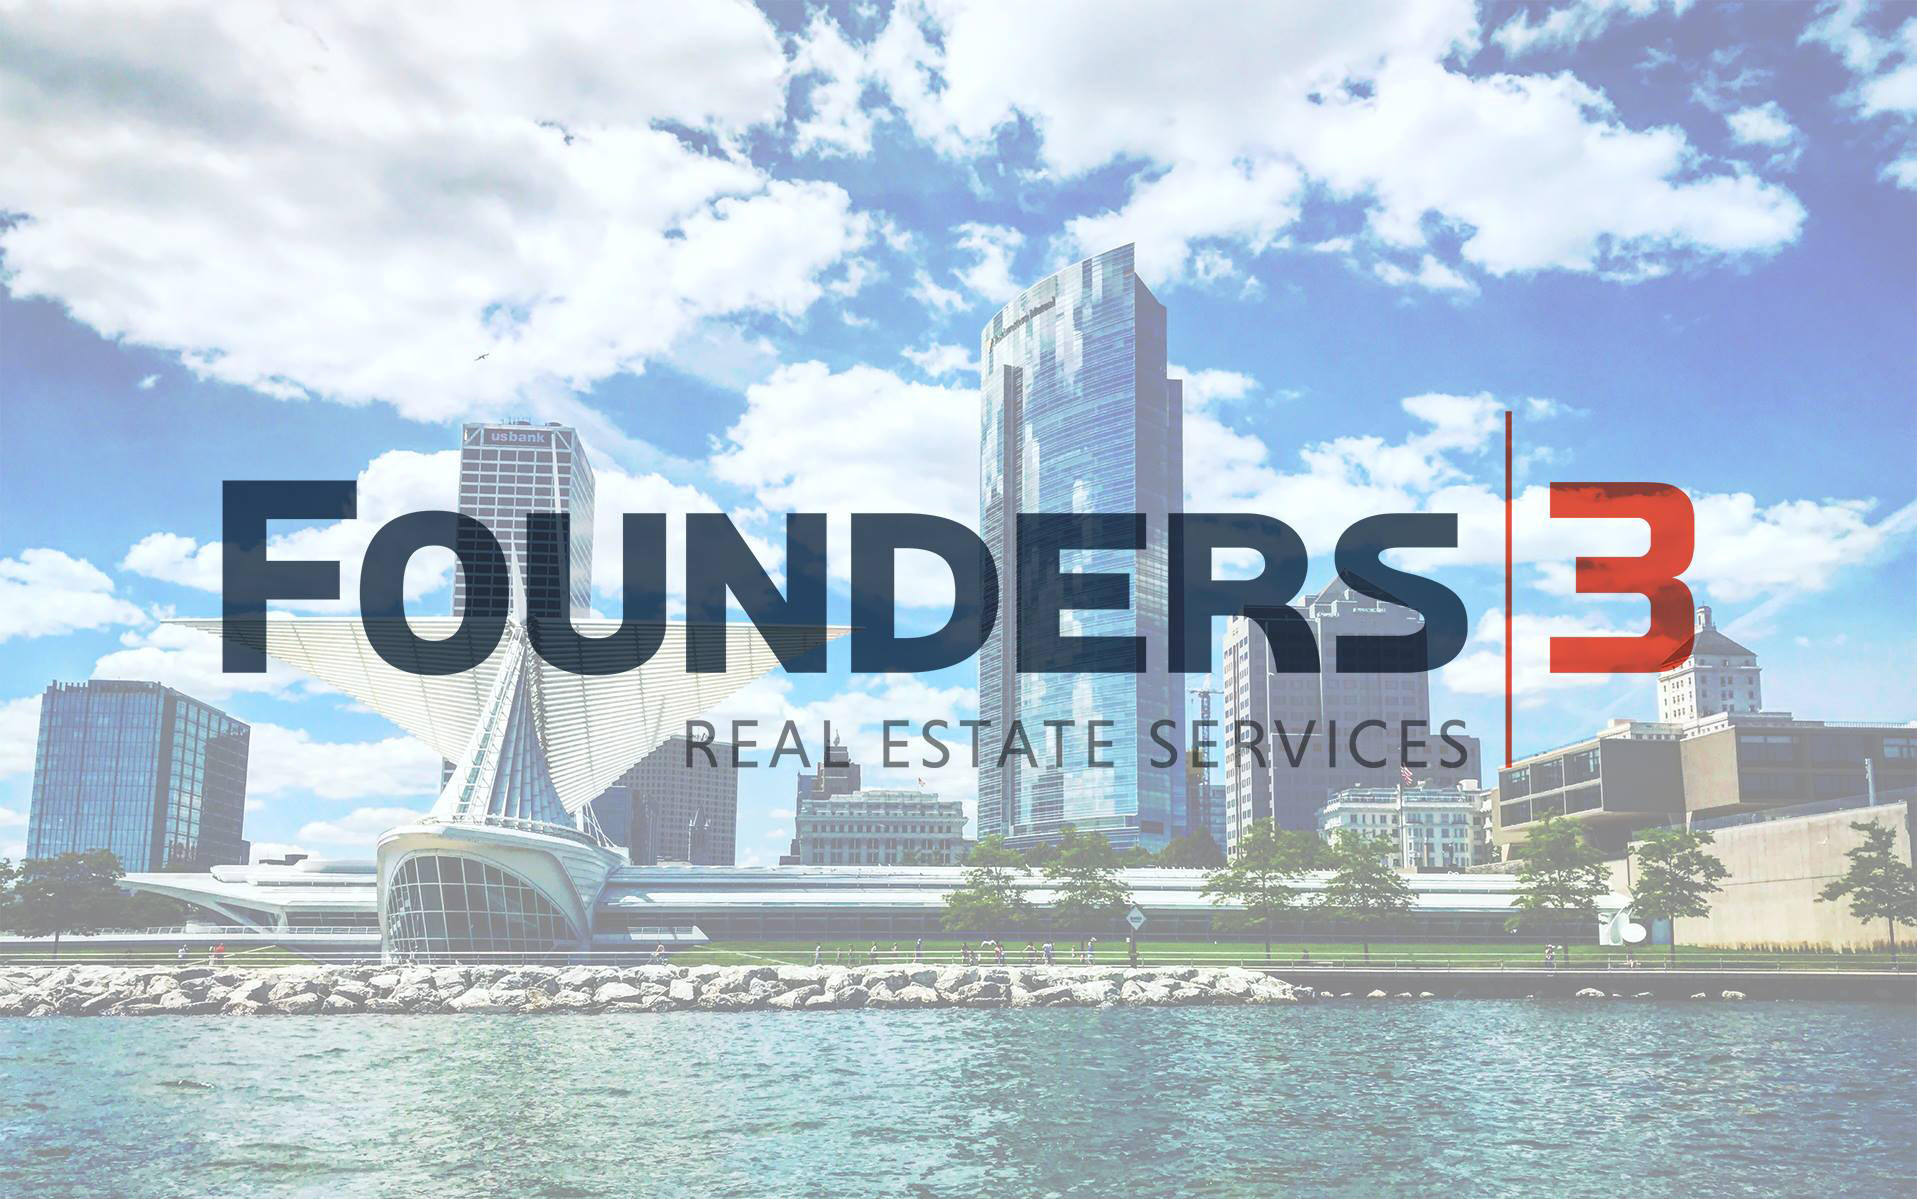 Founders 3 Real Estate Services Photo